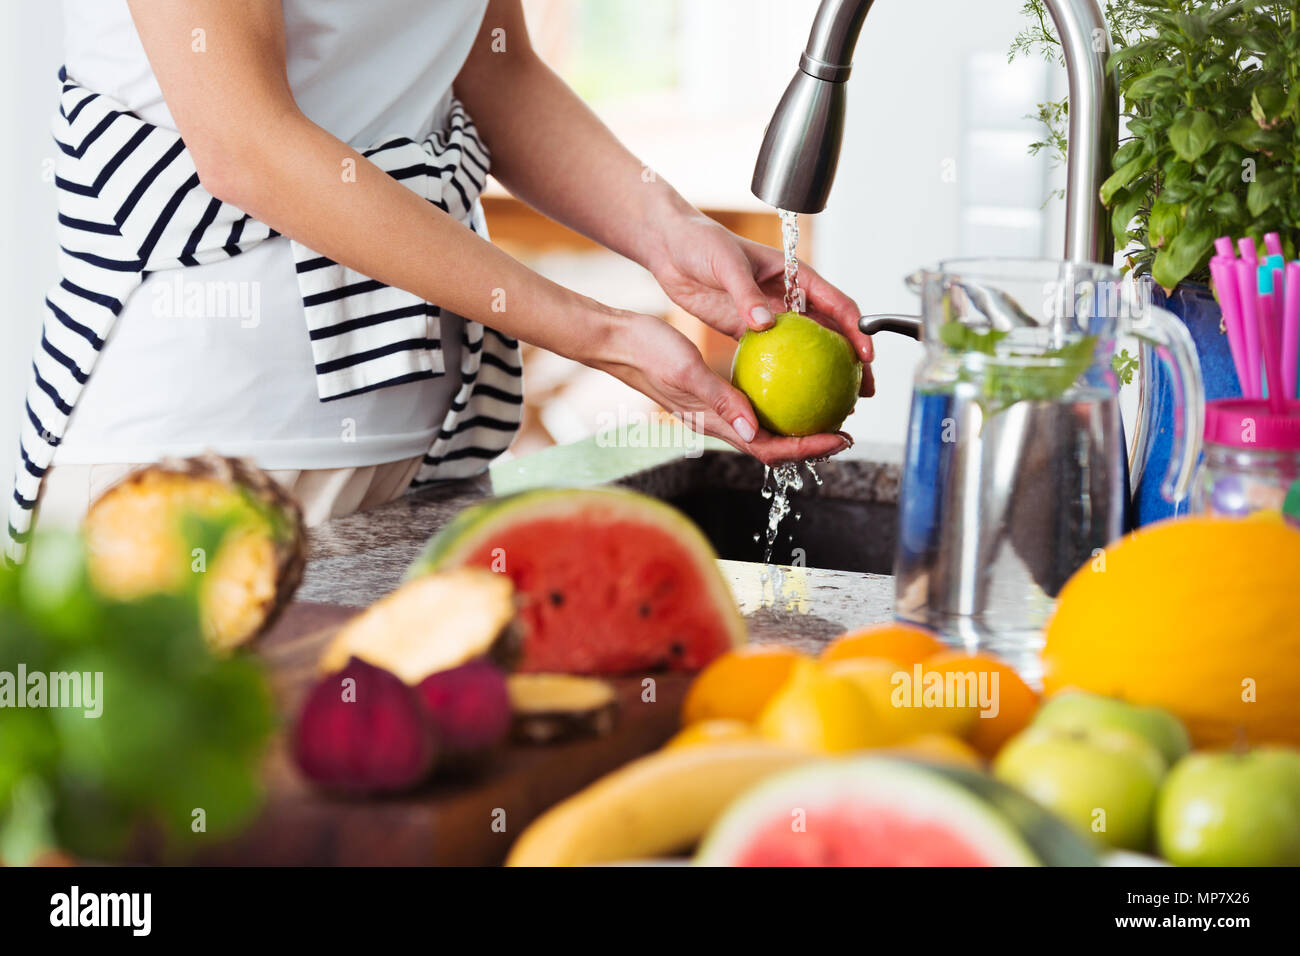 Healthy woman washing an apple above kitchen sink while preparing fresh breakfast with fruit Stock Photo